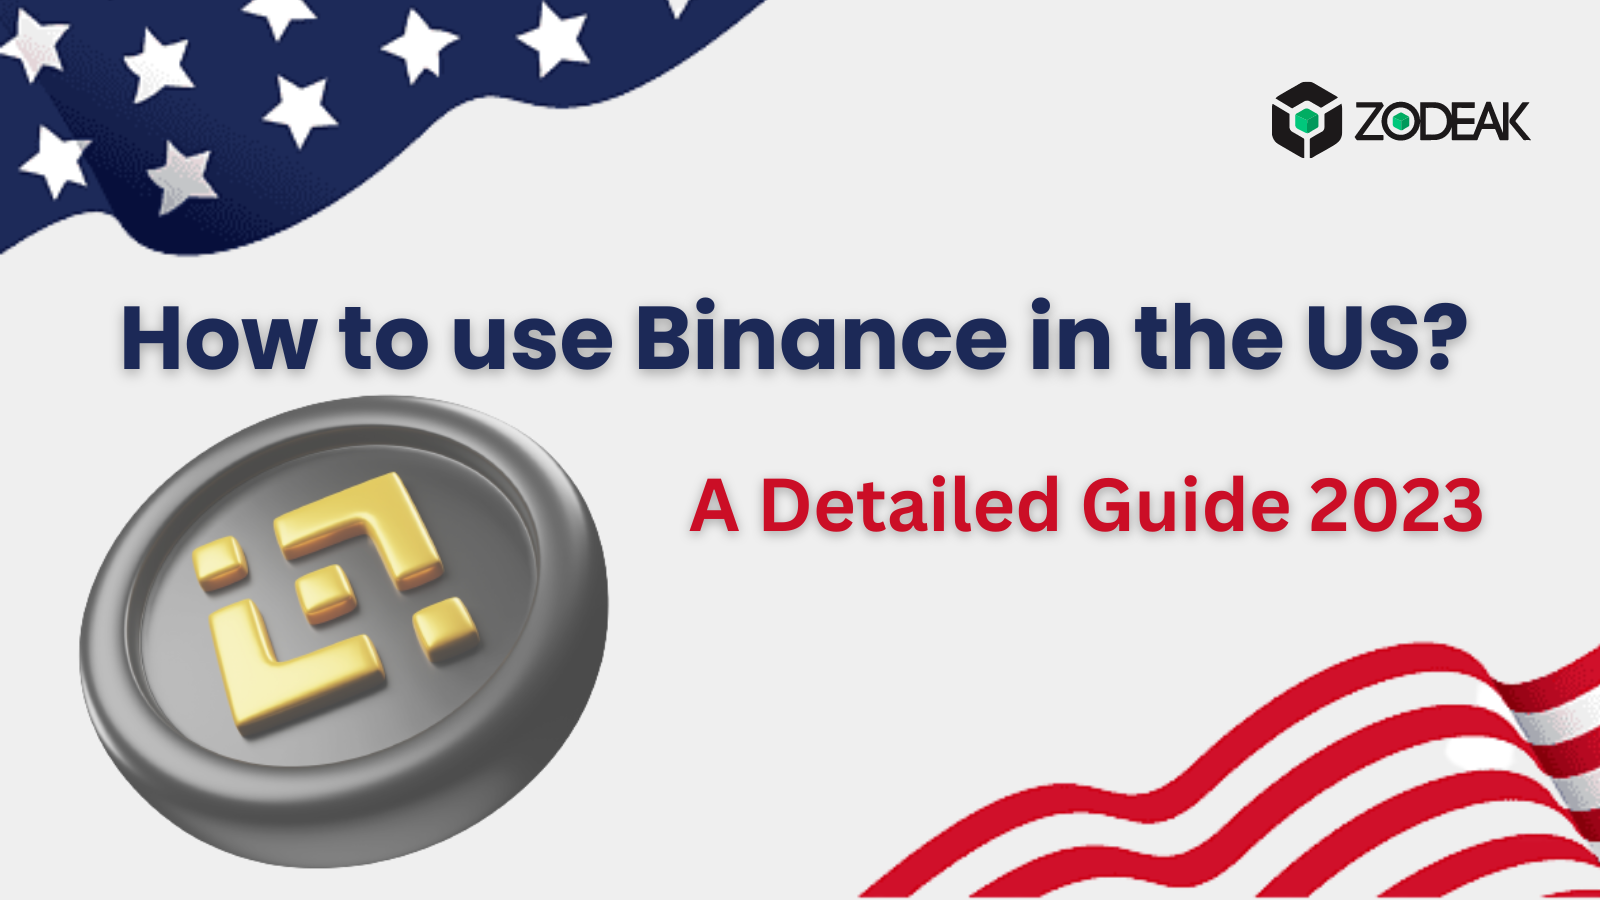 How to use Binance in the US? - A Detailed Guide 2023